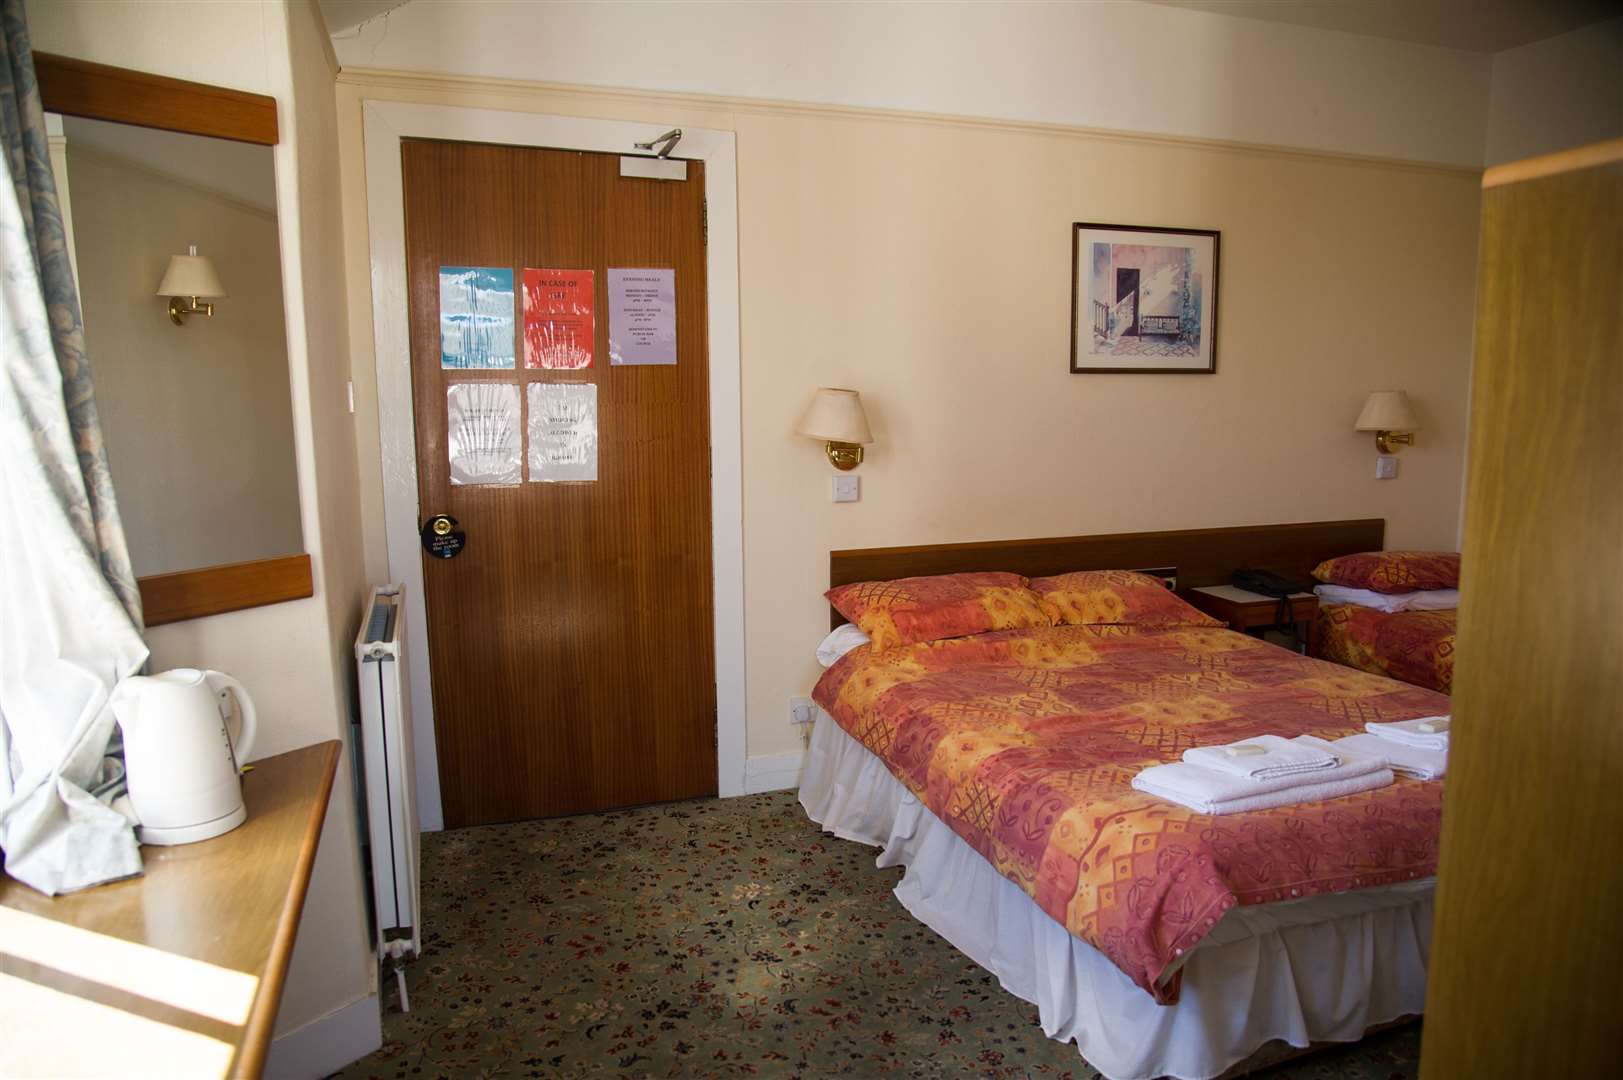 One of the seven hotel bedrooms.